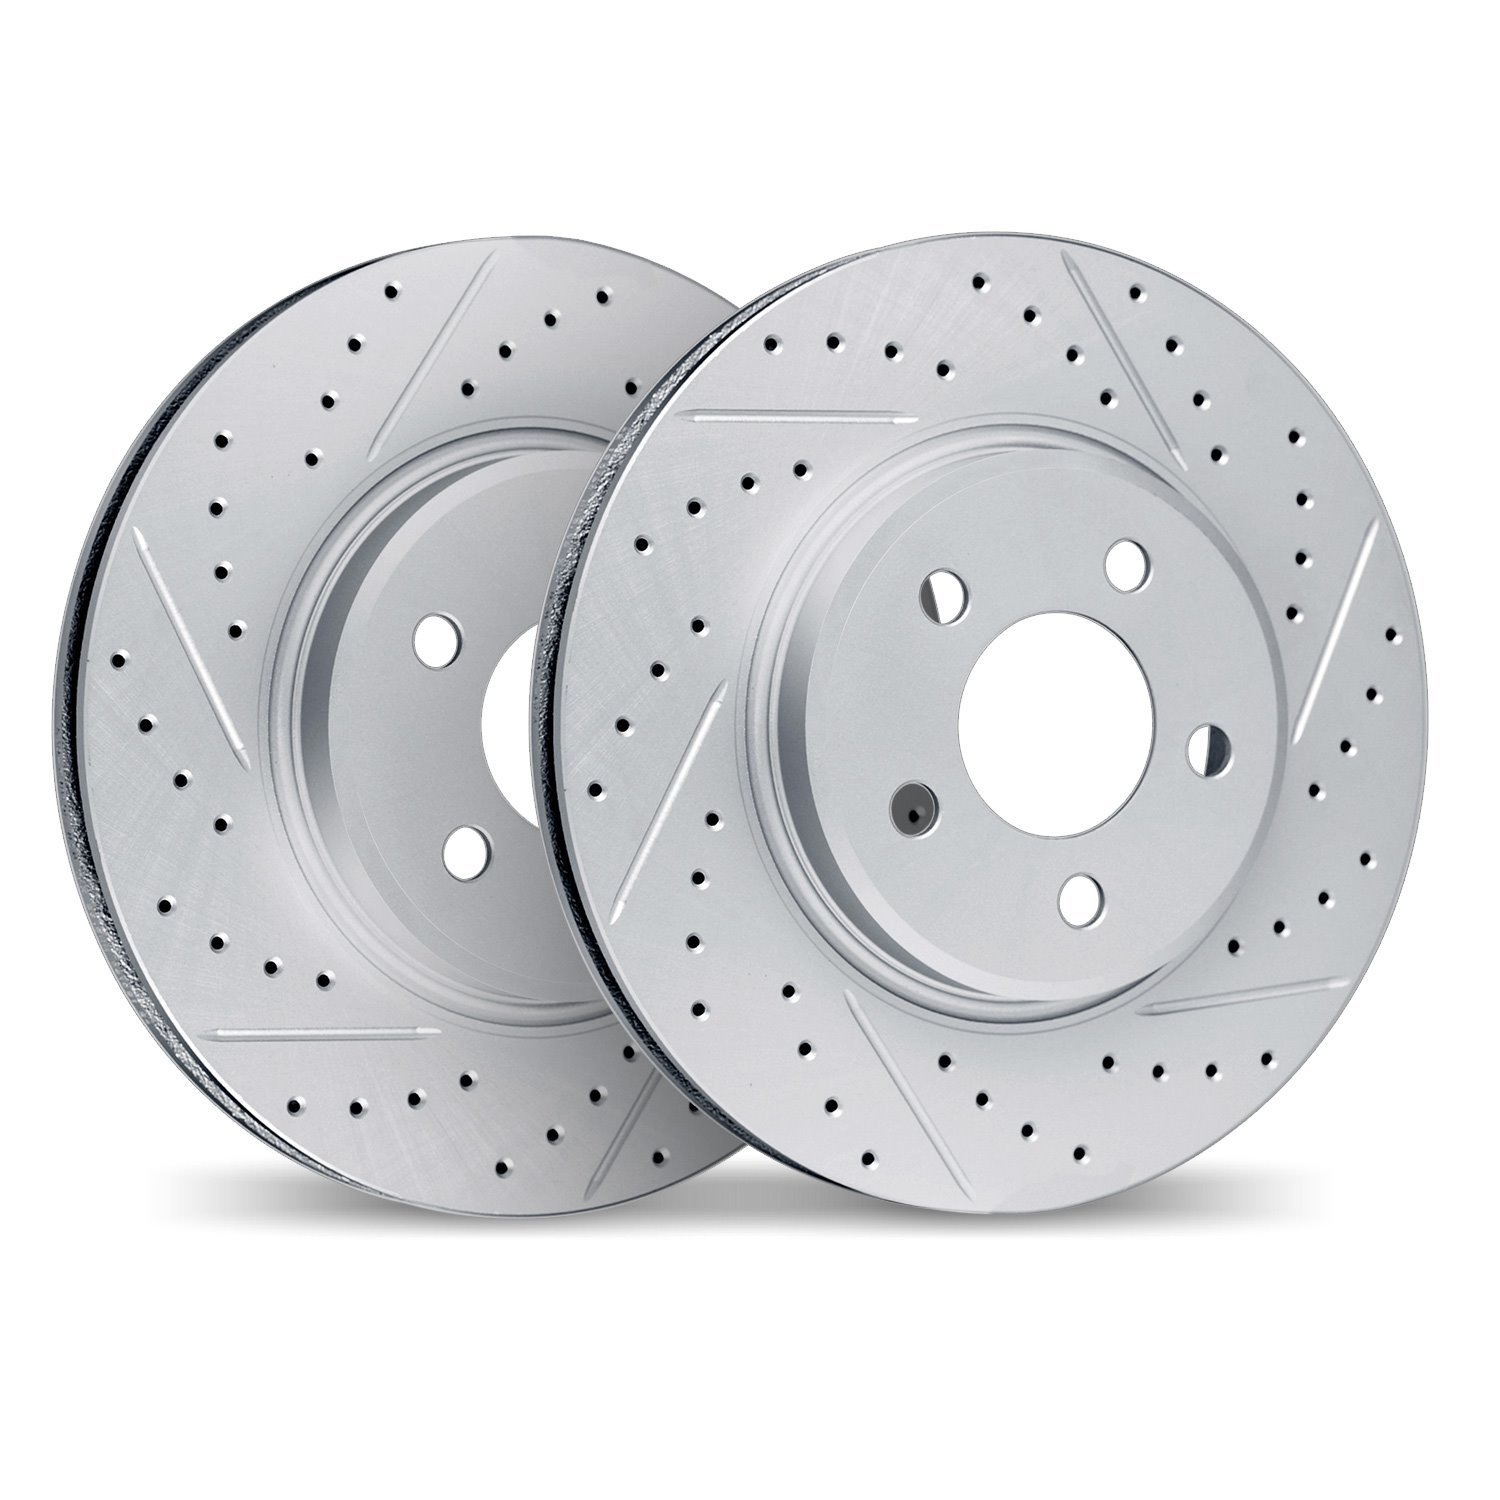 2002-67037 Geoperformance Drilled/Slotted Brake Rotors, 2014-2019 Infiniti/Nissan, Position: Front